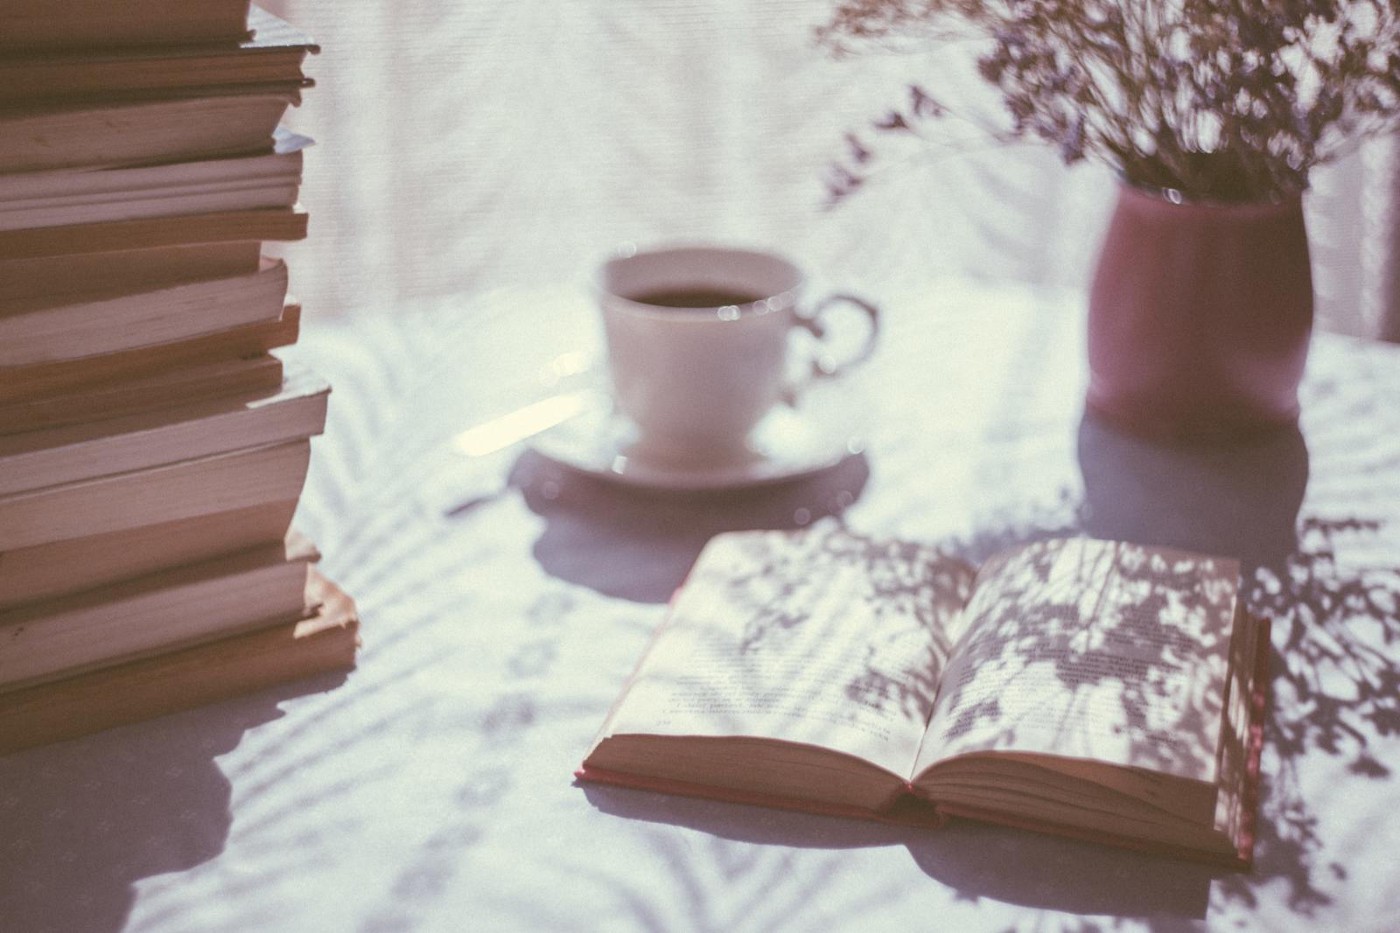 A coffee table next to a bright window, on top of which sits a stack of books, a cup of tea, an open book, and a vase.